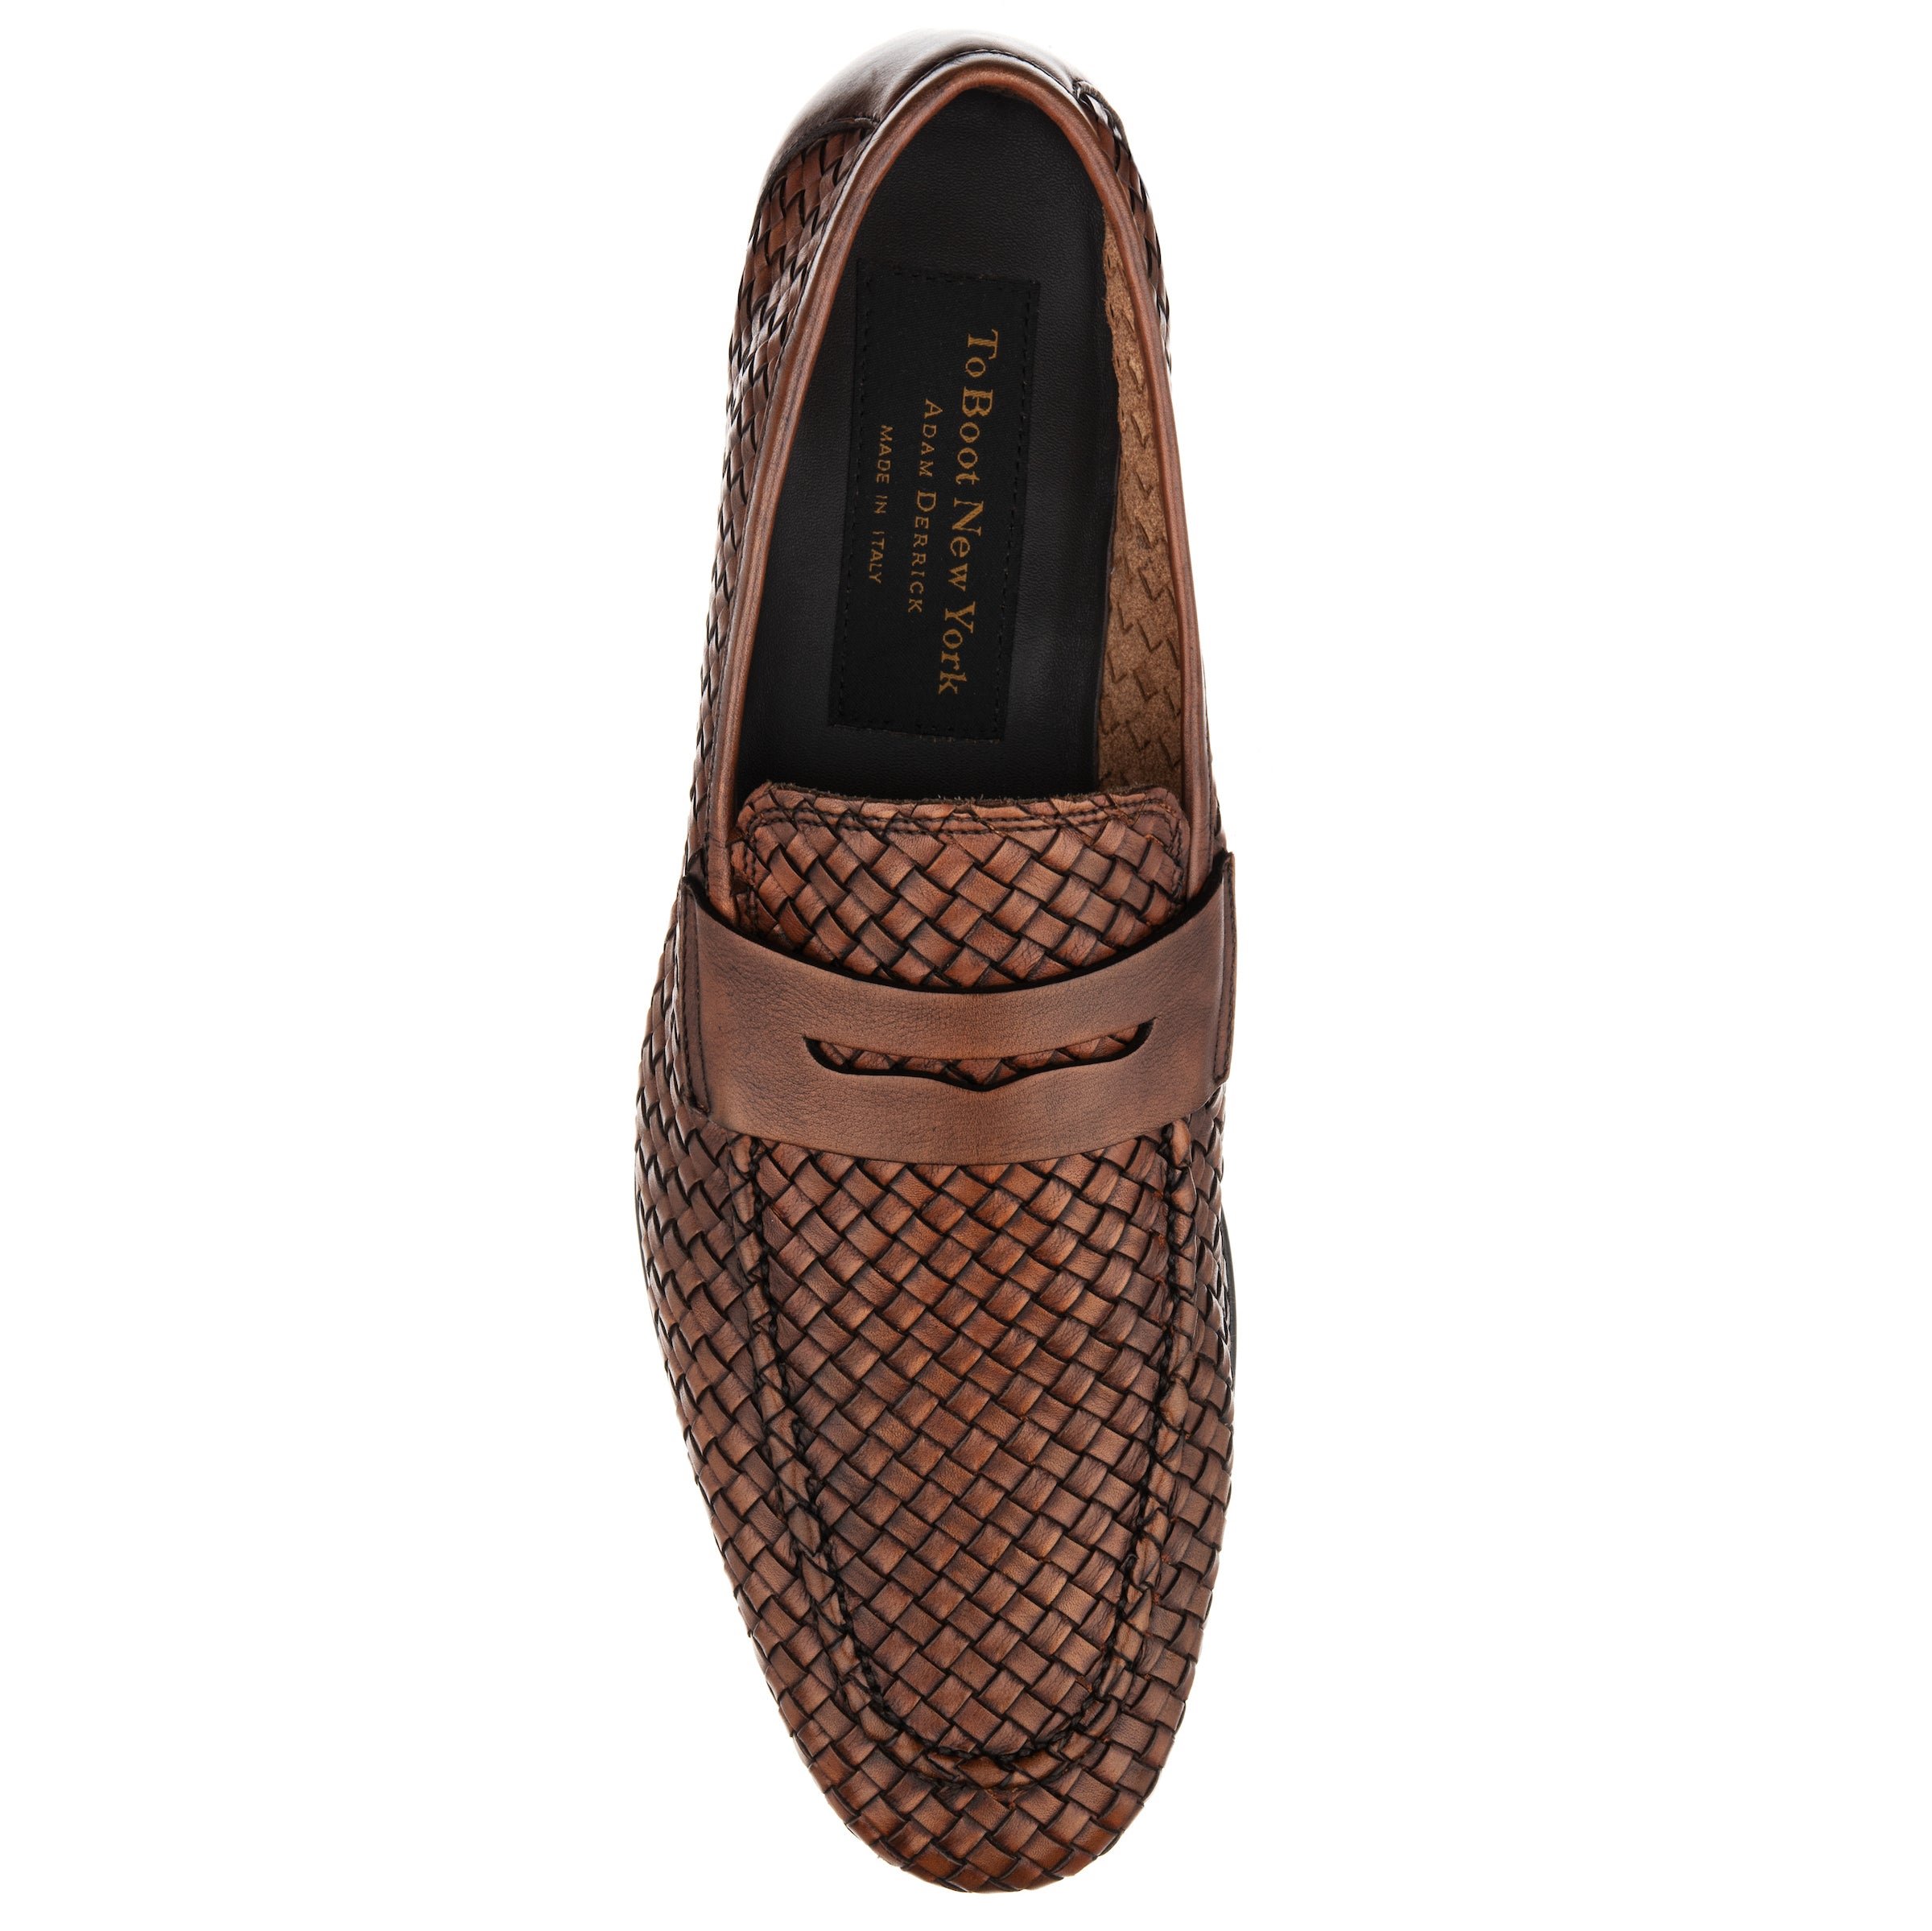 Zenith Cognac Woven Leather Loafer